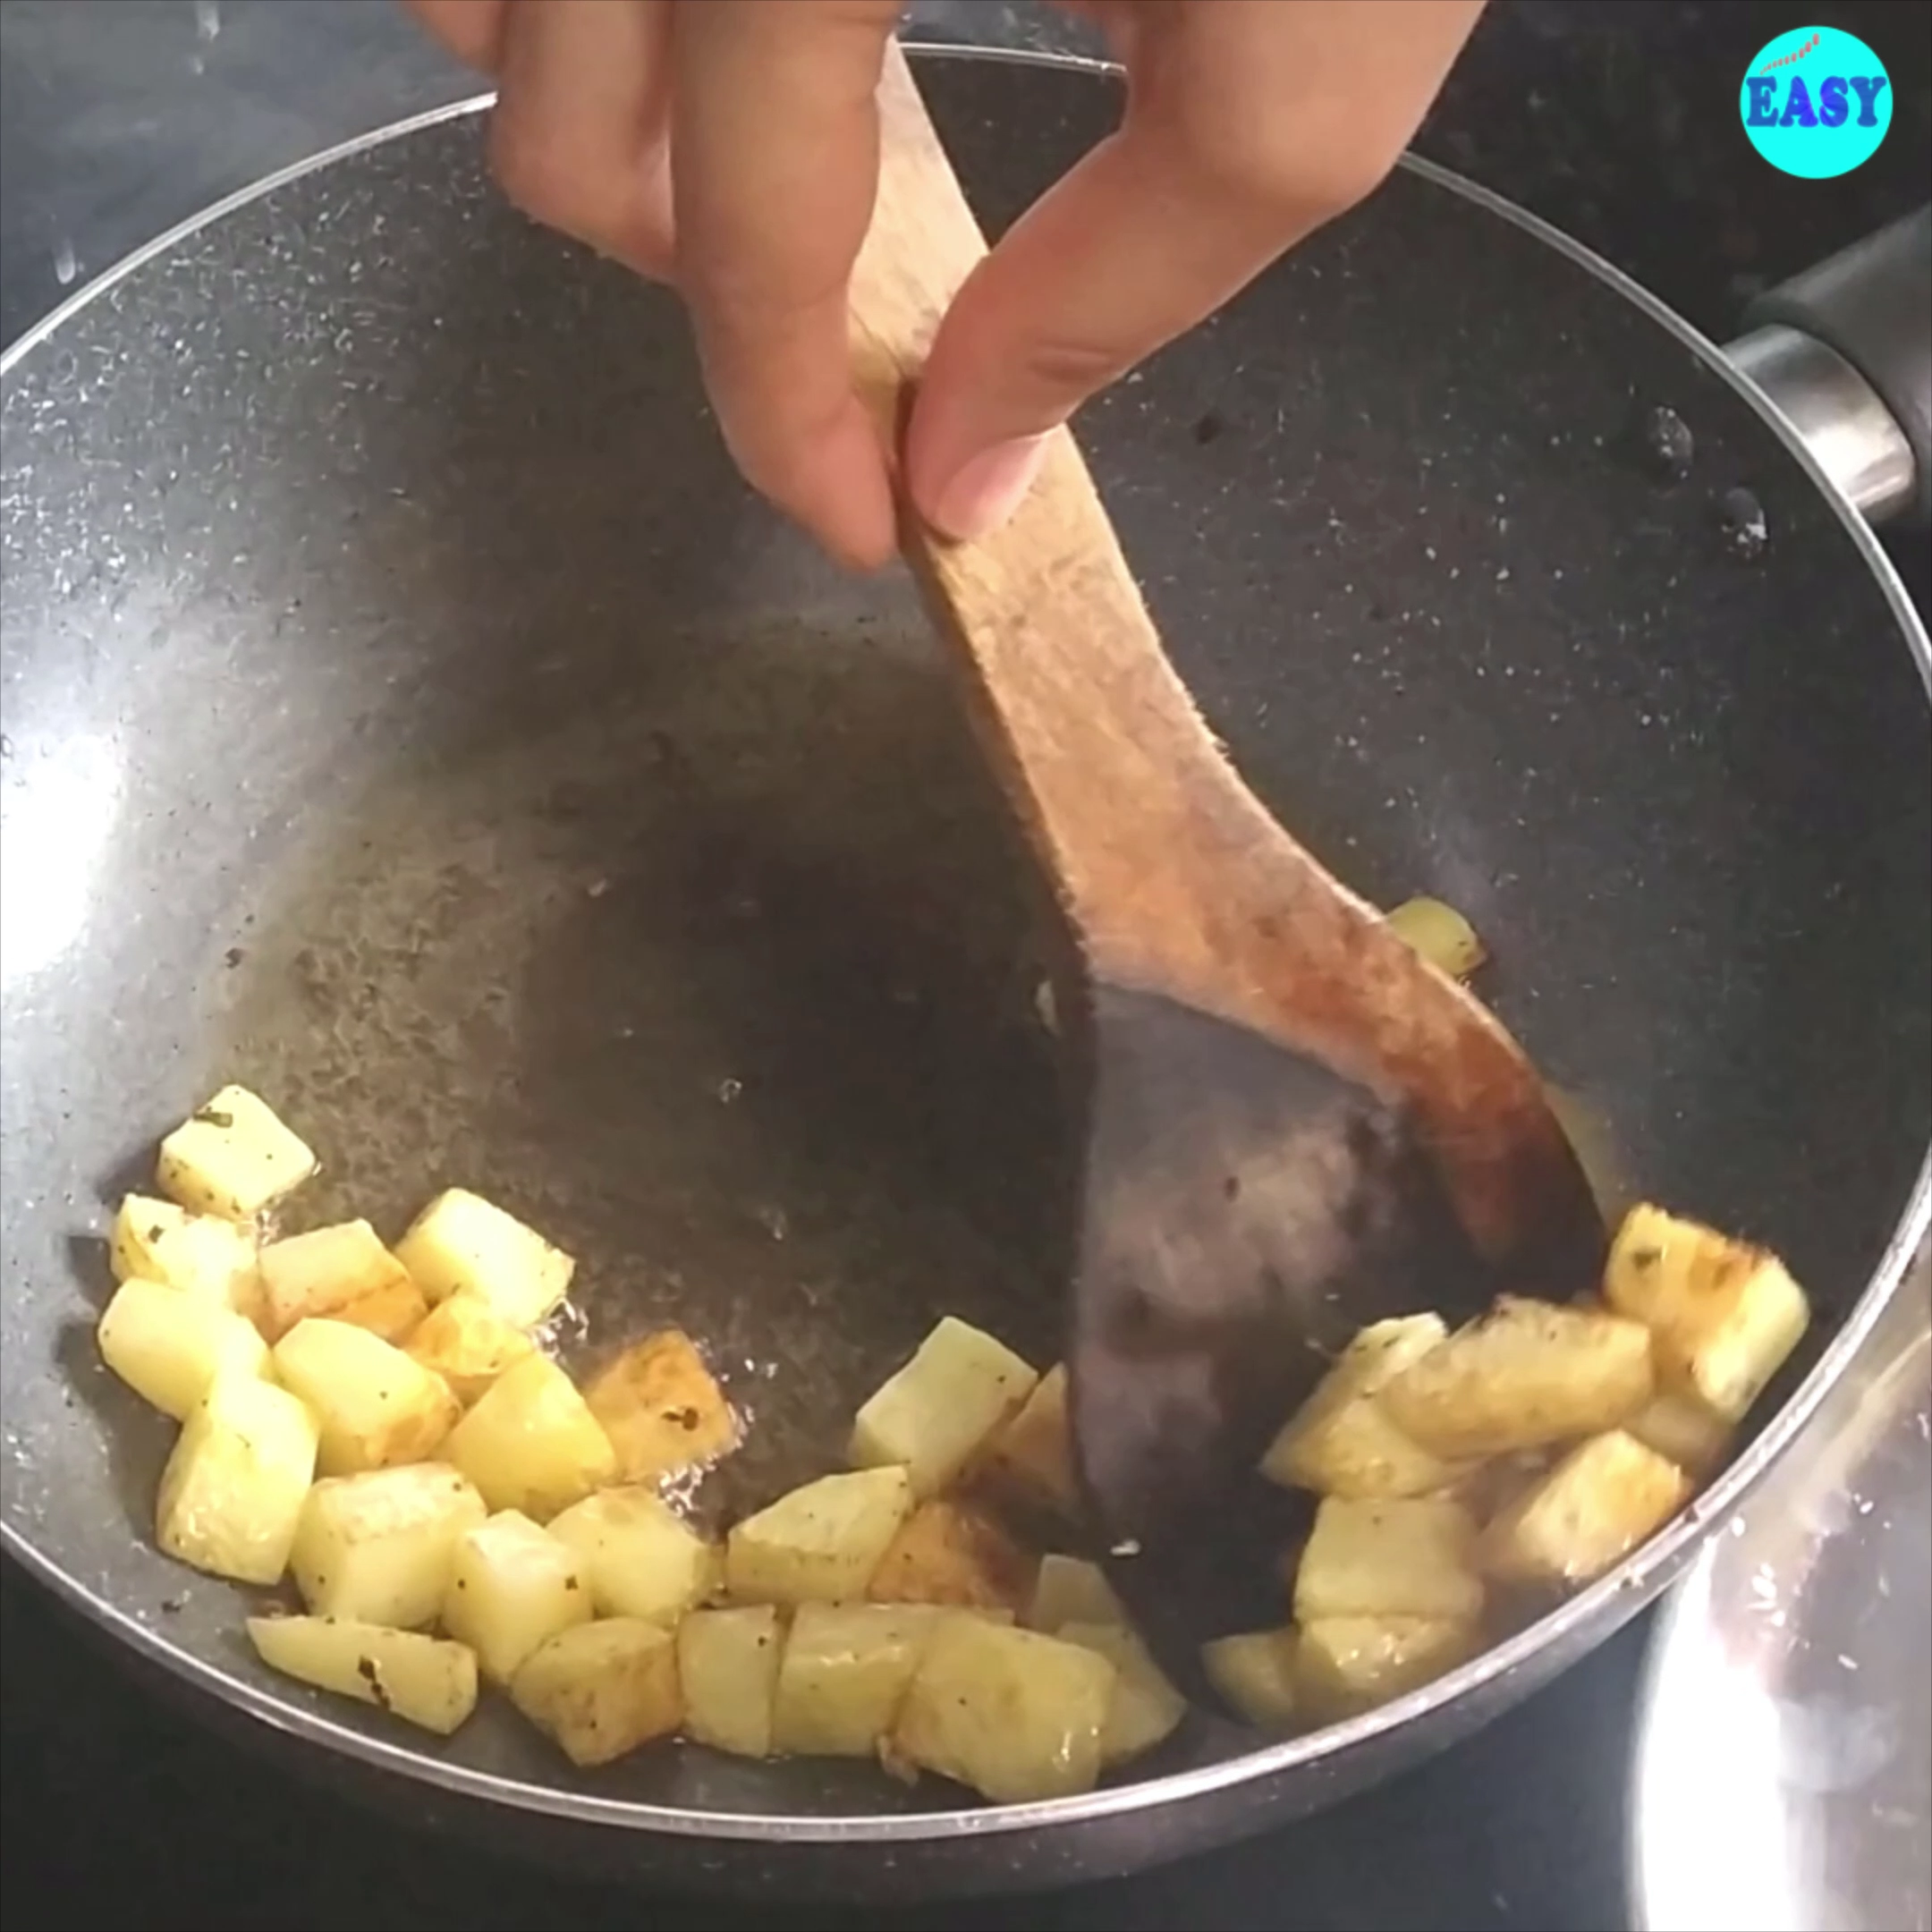 Step 2 - Fry the potatoes same way until light golden. Cauliflower and potatoes should be 70 percent cooked in this step. set aside to use later